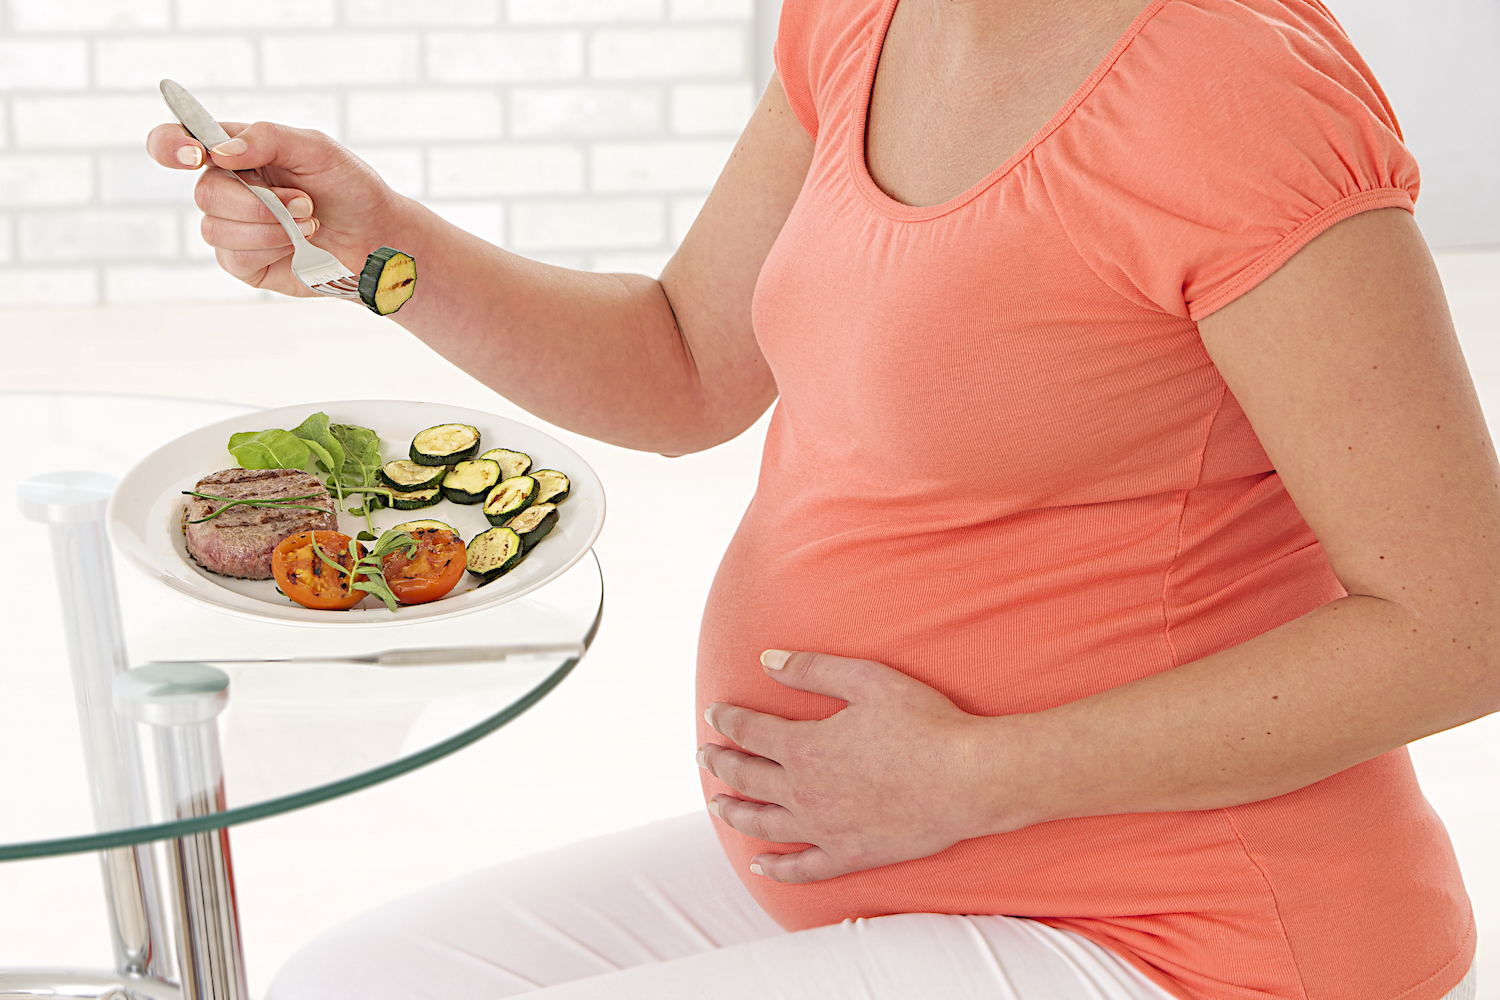 Pregnant woman wearing bright orange shirt sitting at a table and eating salad and a steak.